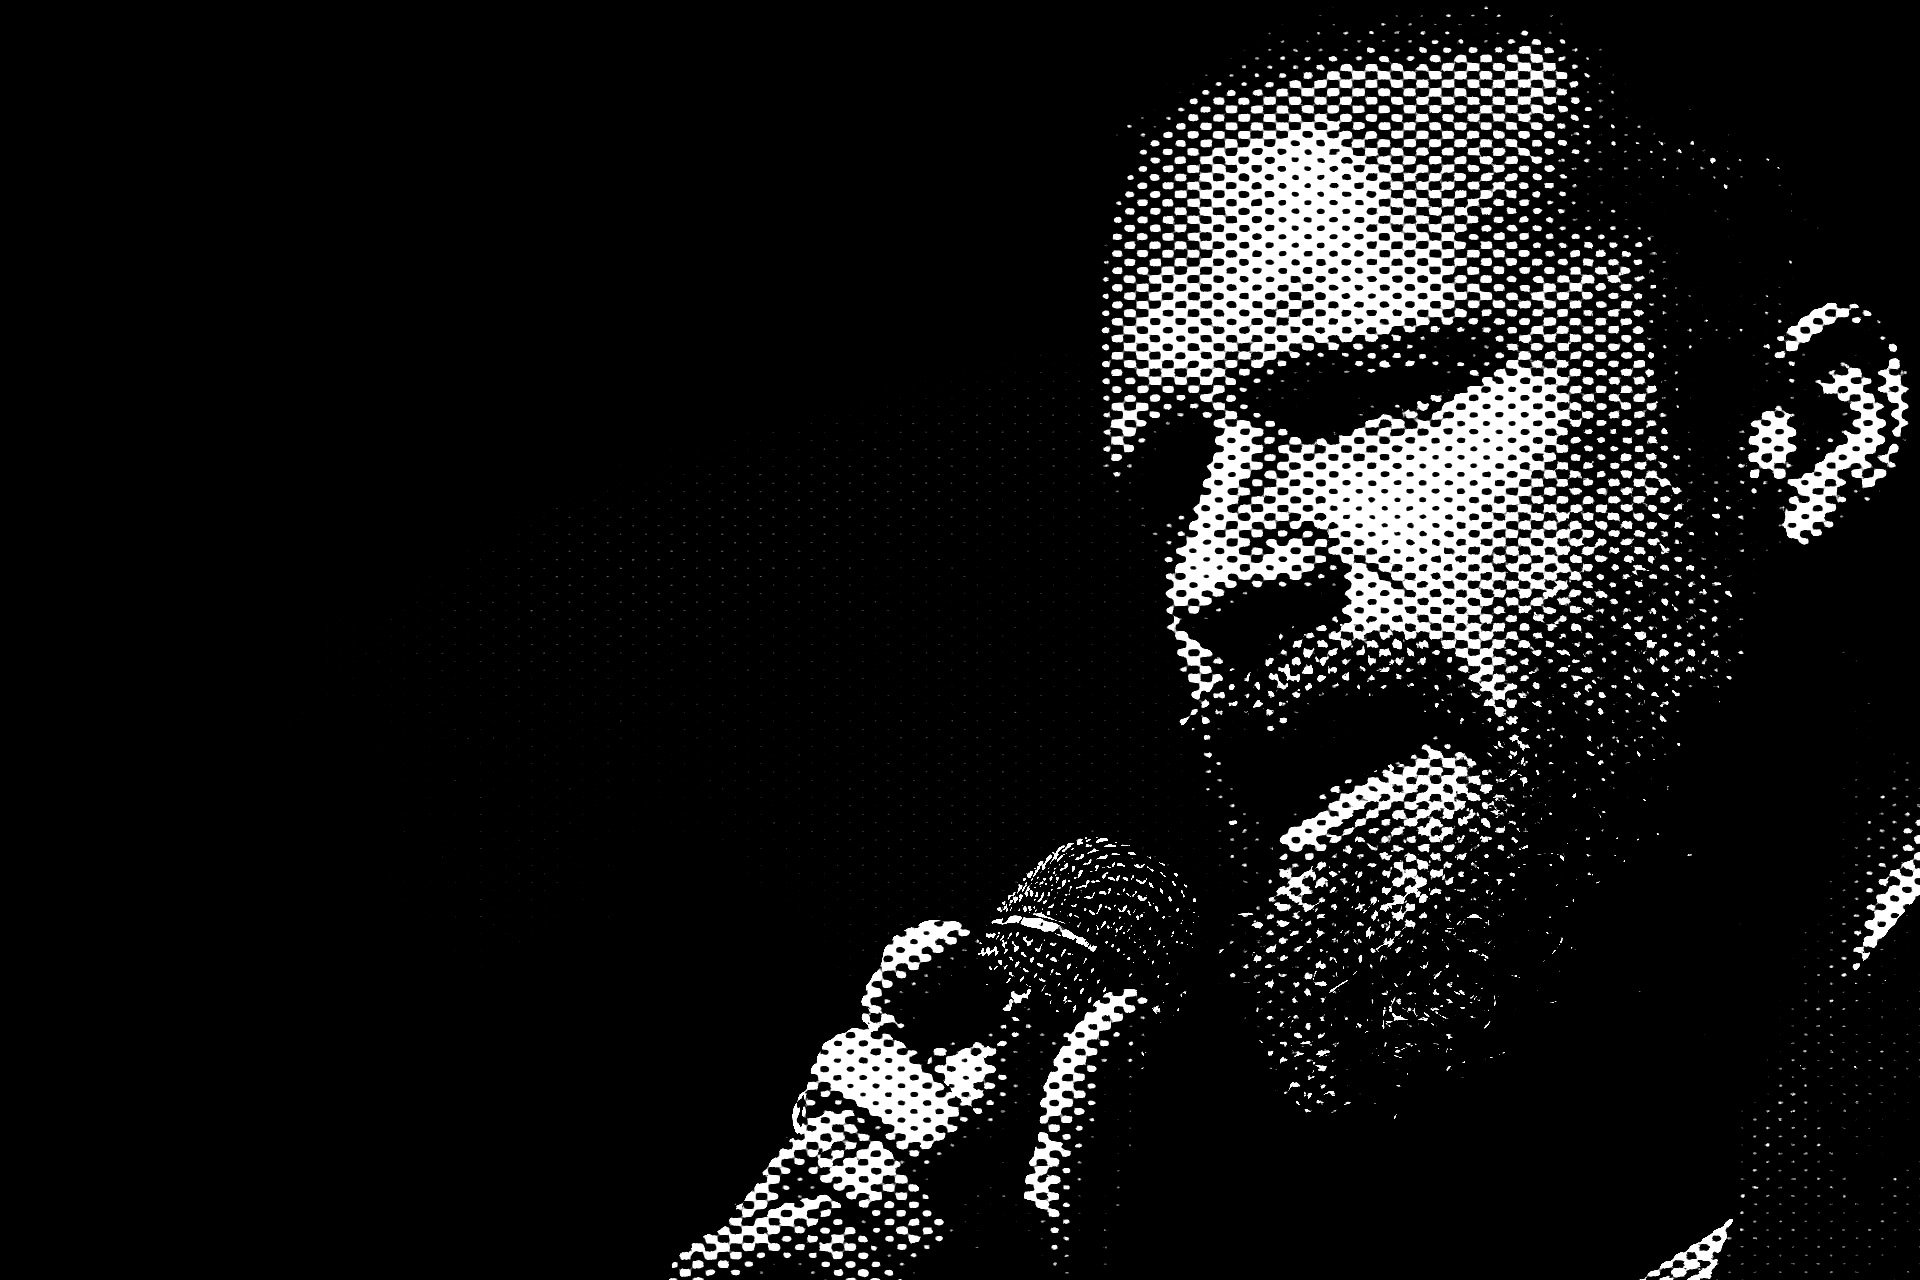 Black and white image of musician Father John Misty